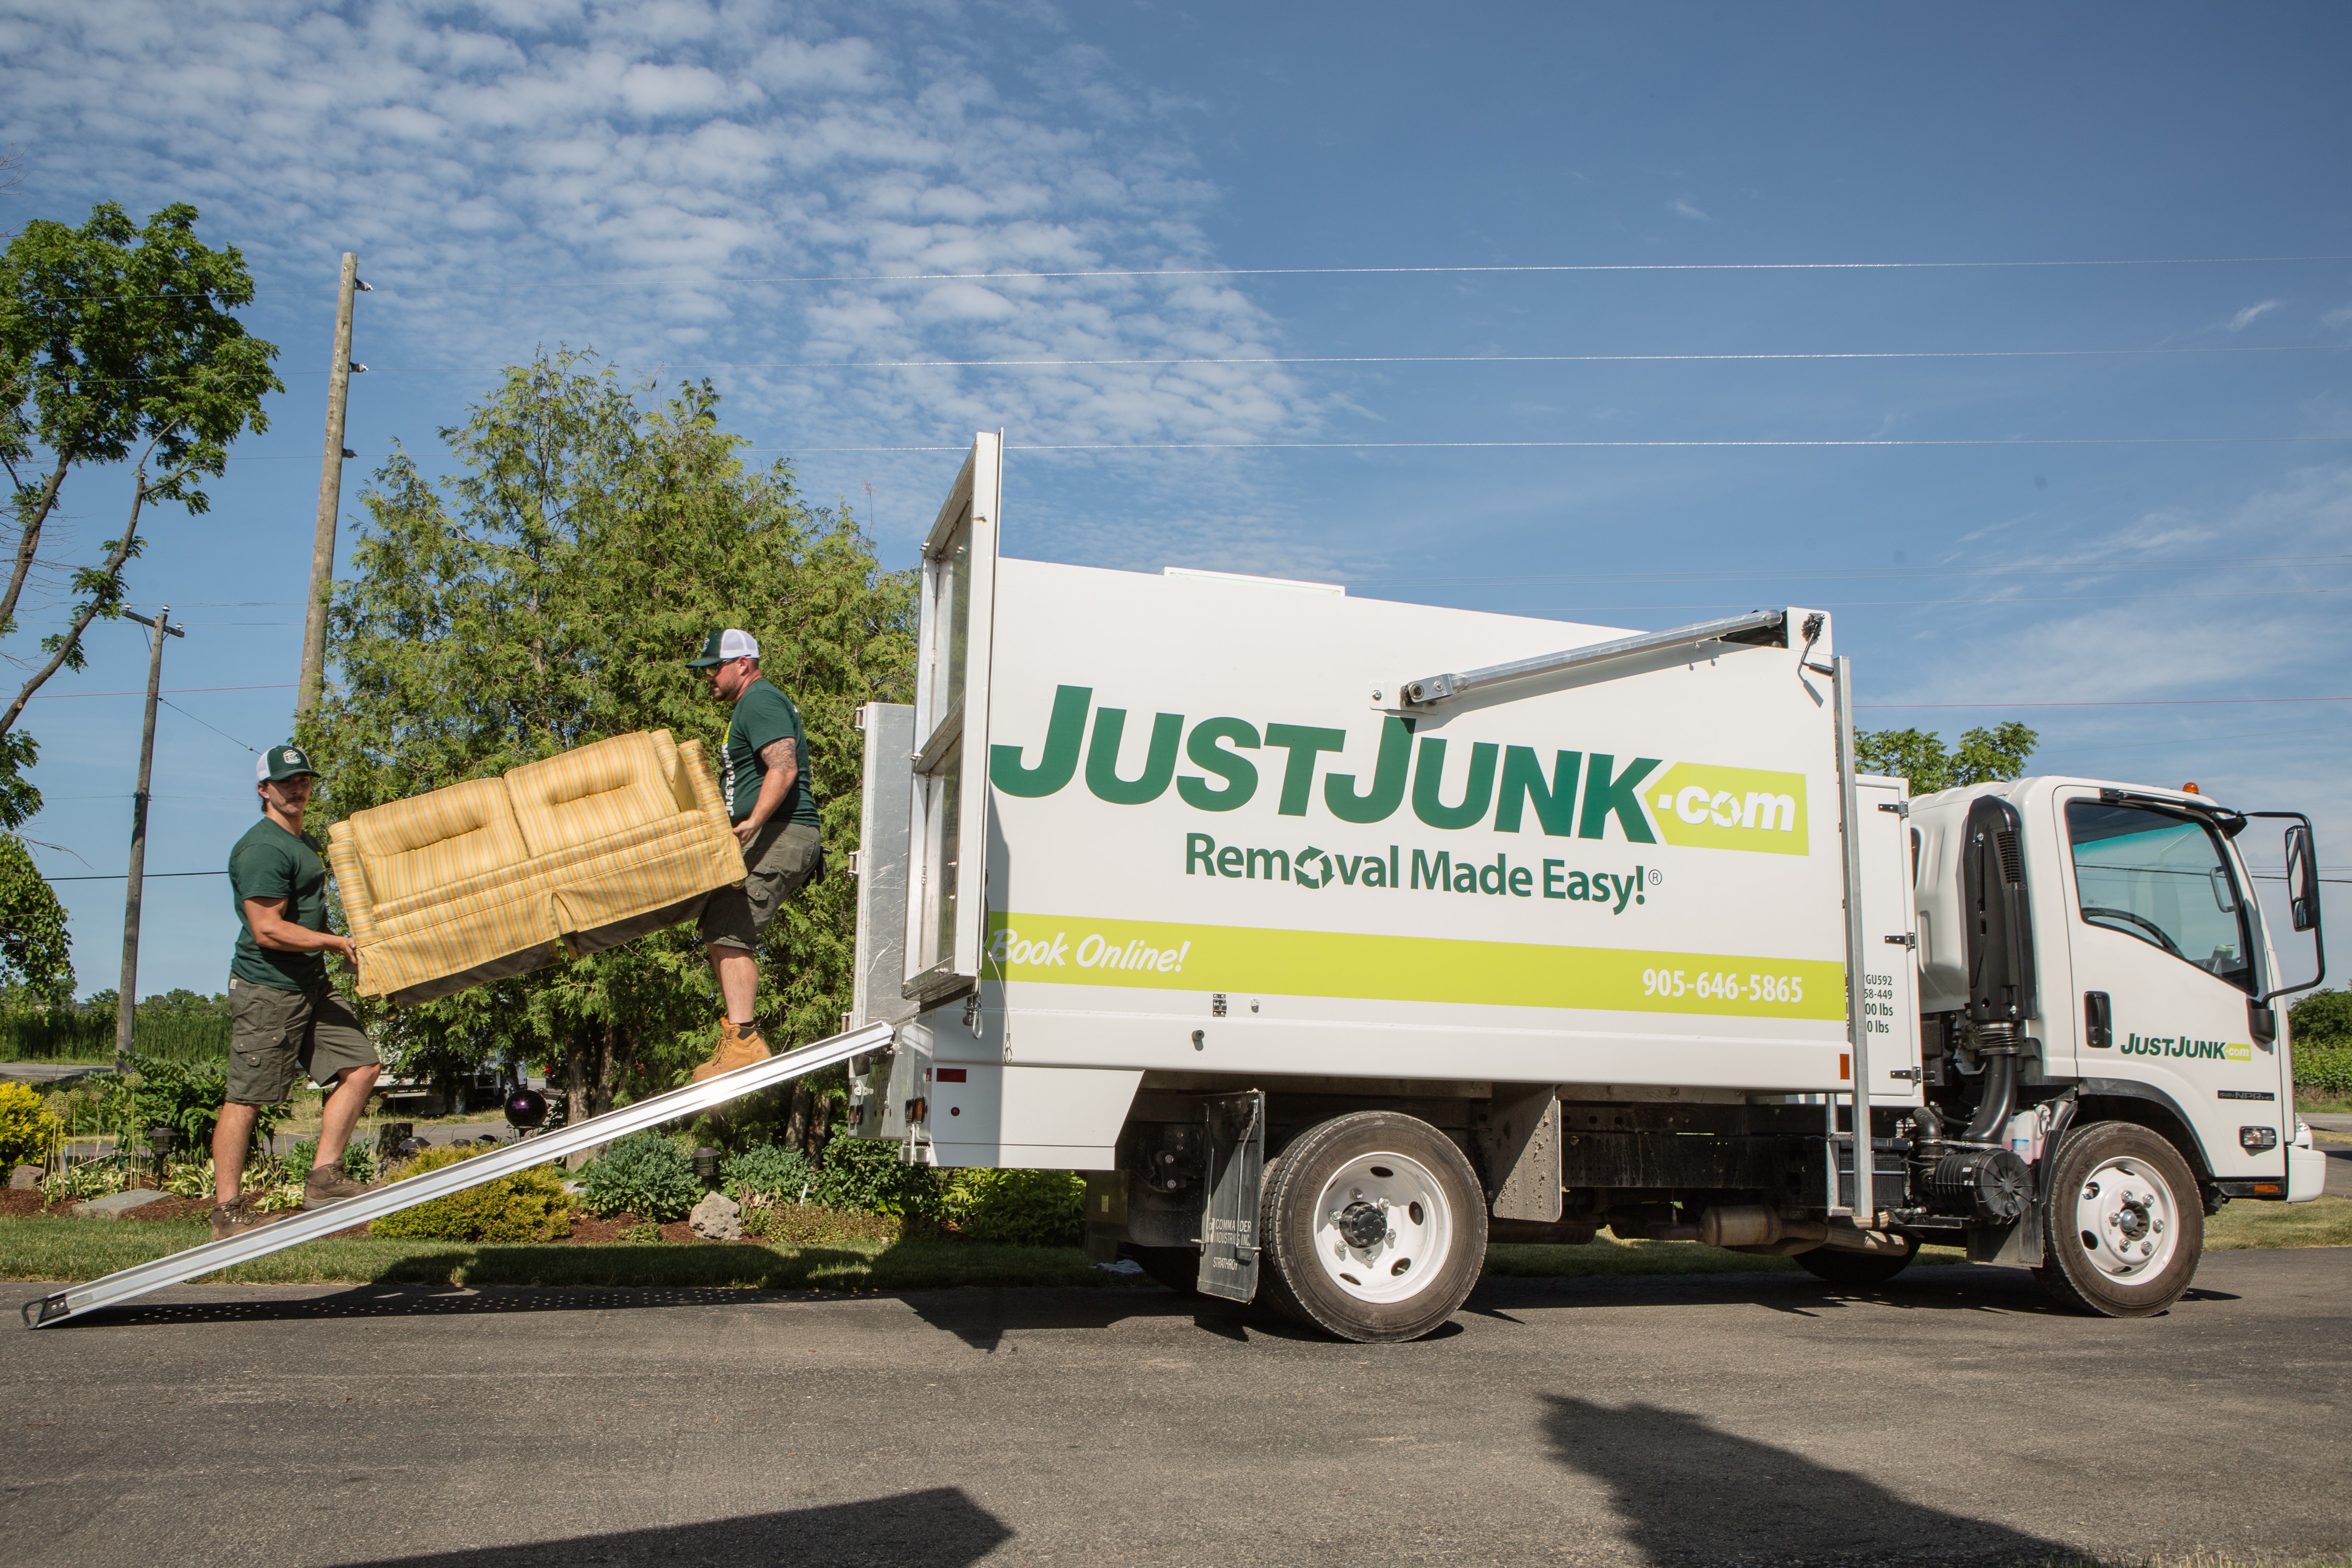 Just Junk - Junk Removal Vancouver